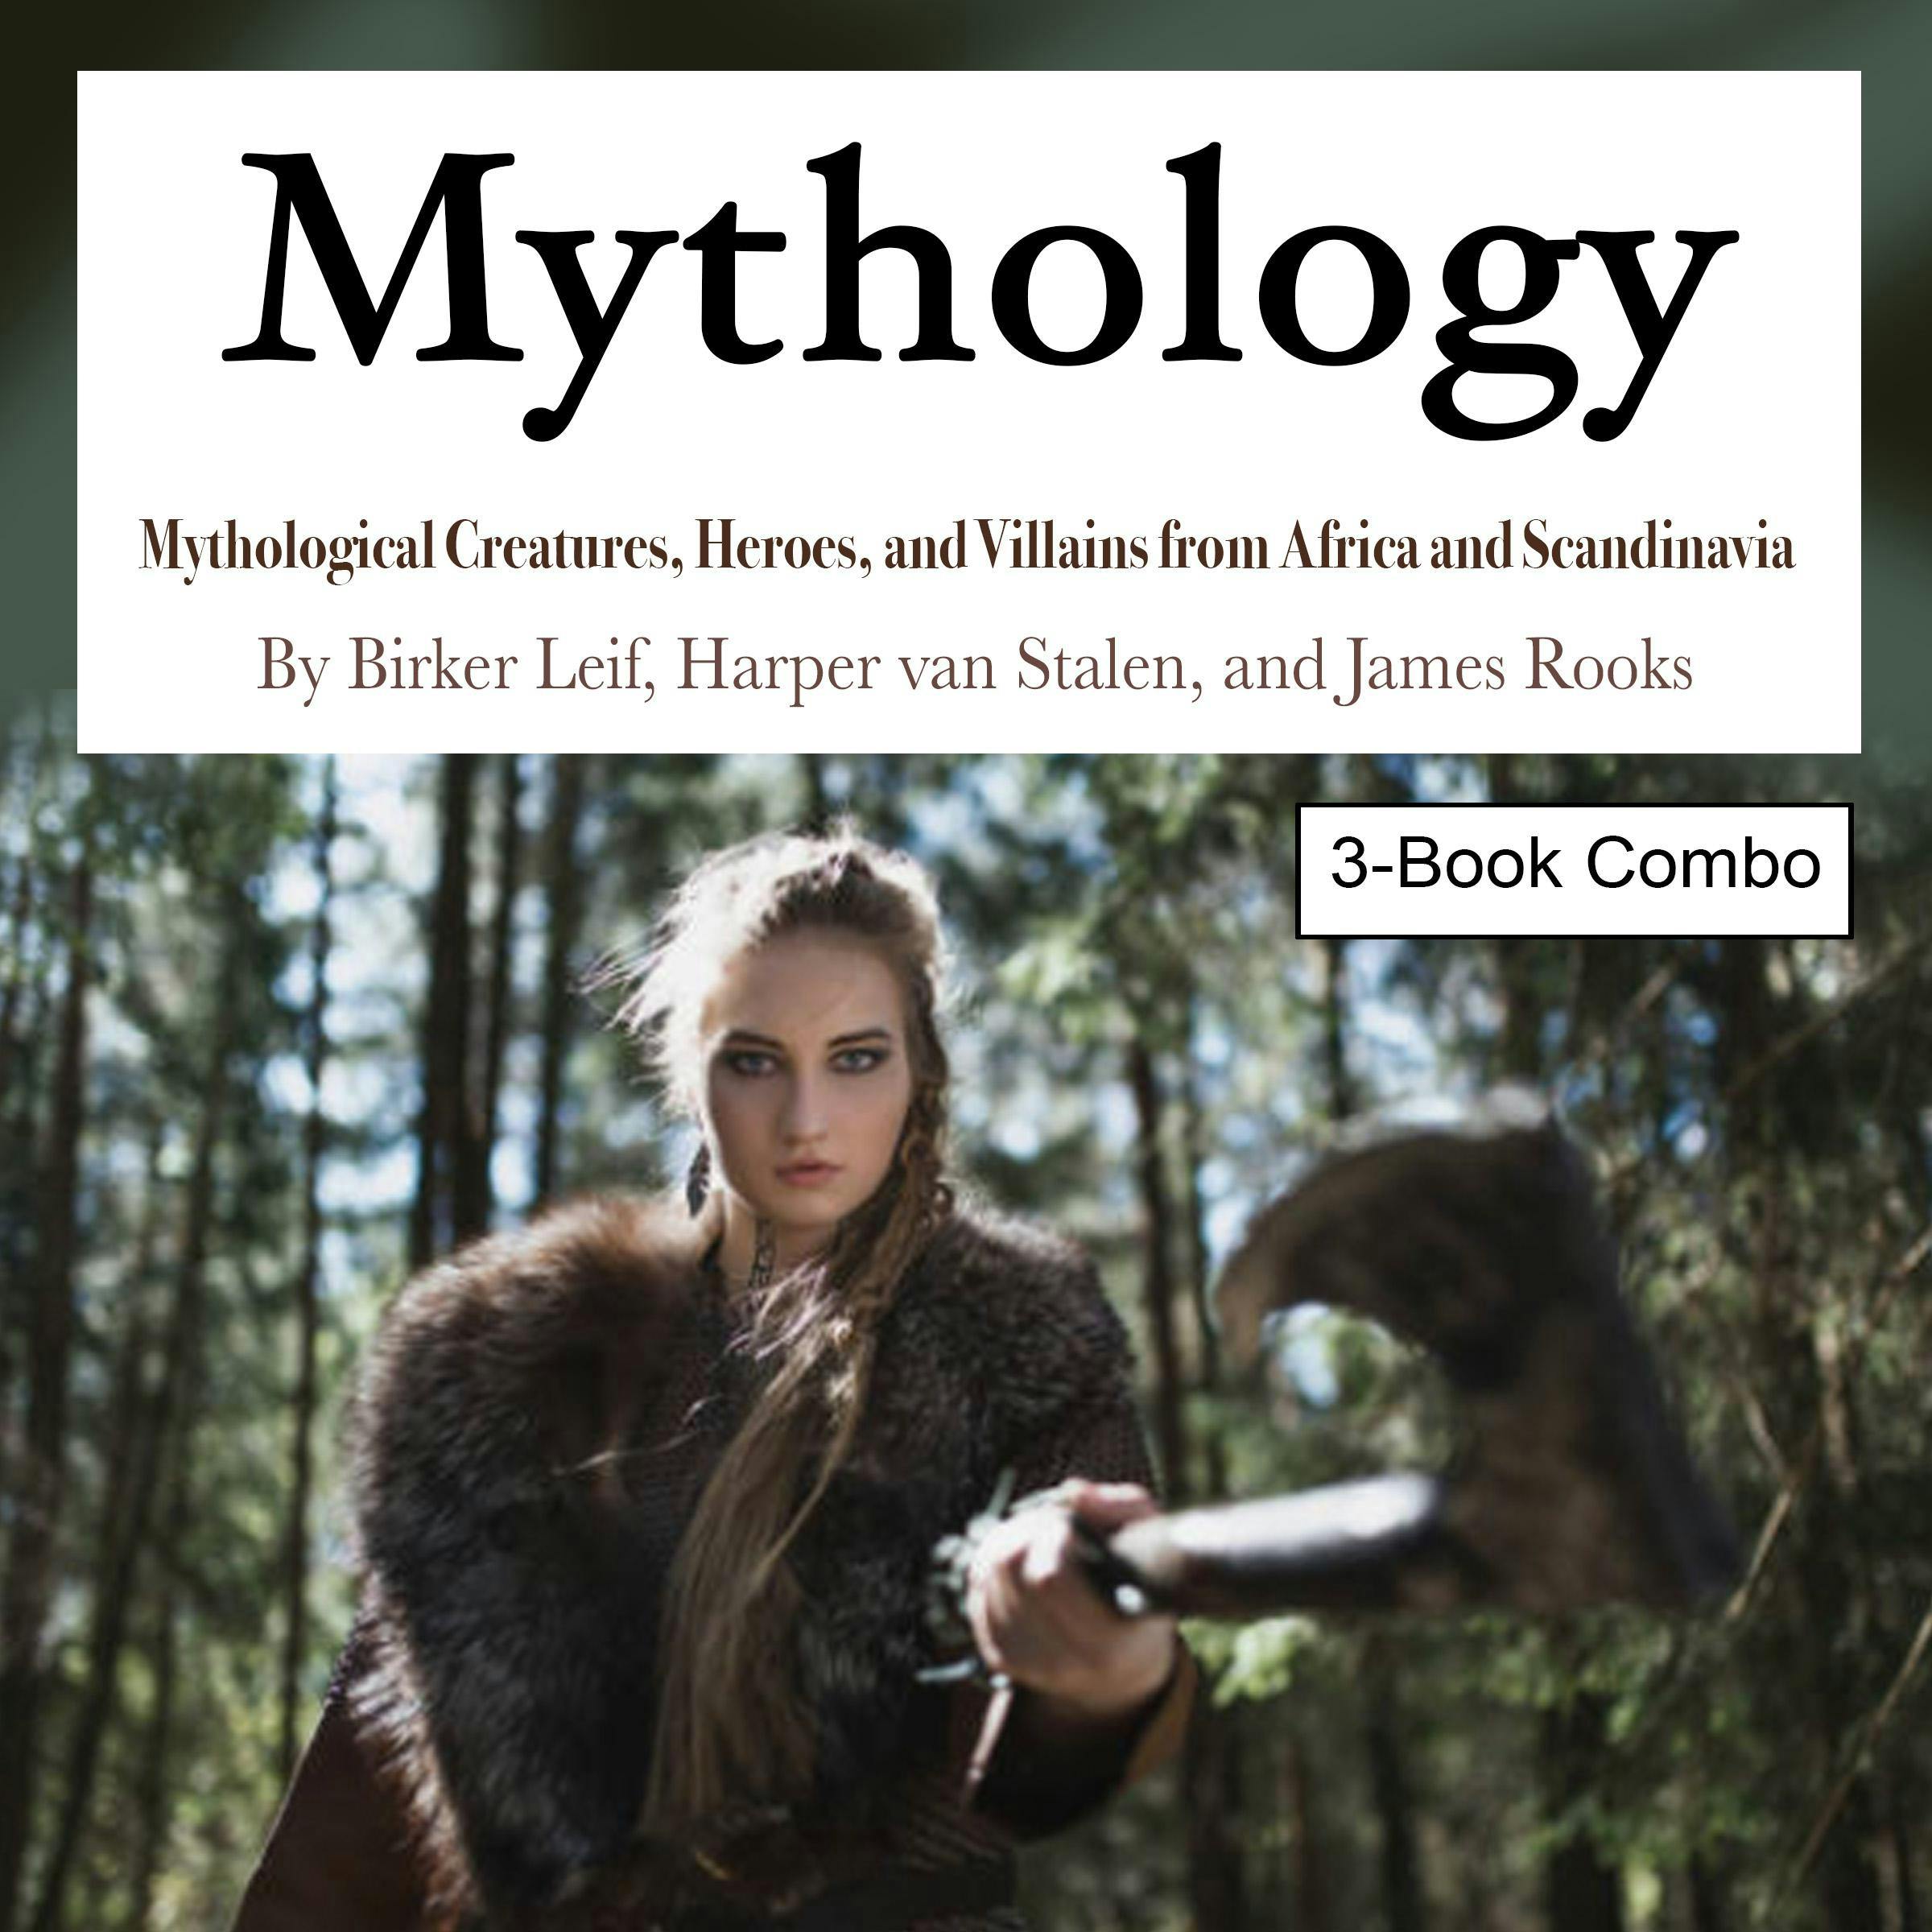 Mythology: Mythological Creatures, Heroes, and Villains from Africa and Scandinavia - undefined